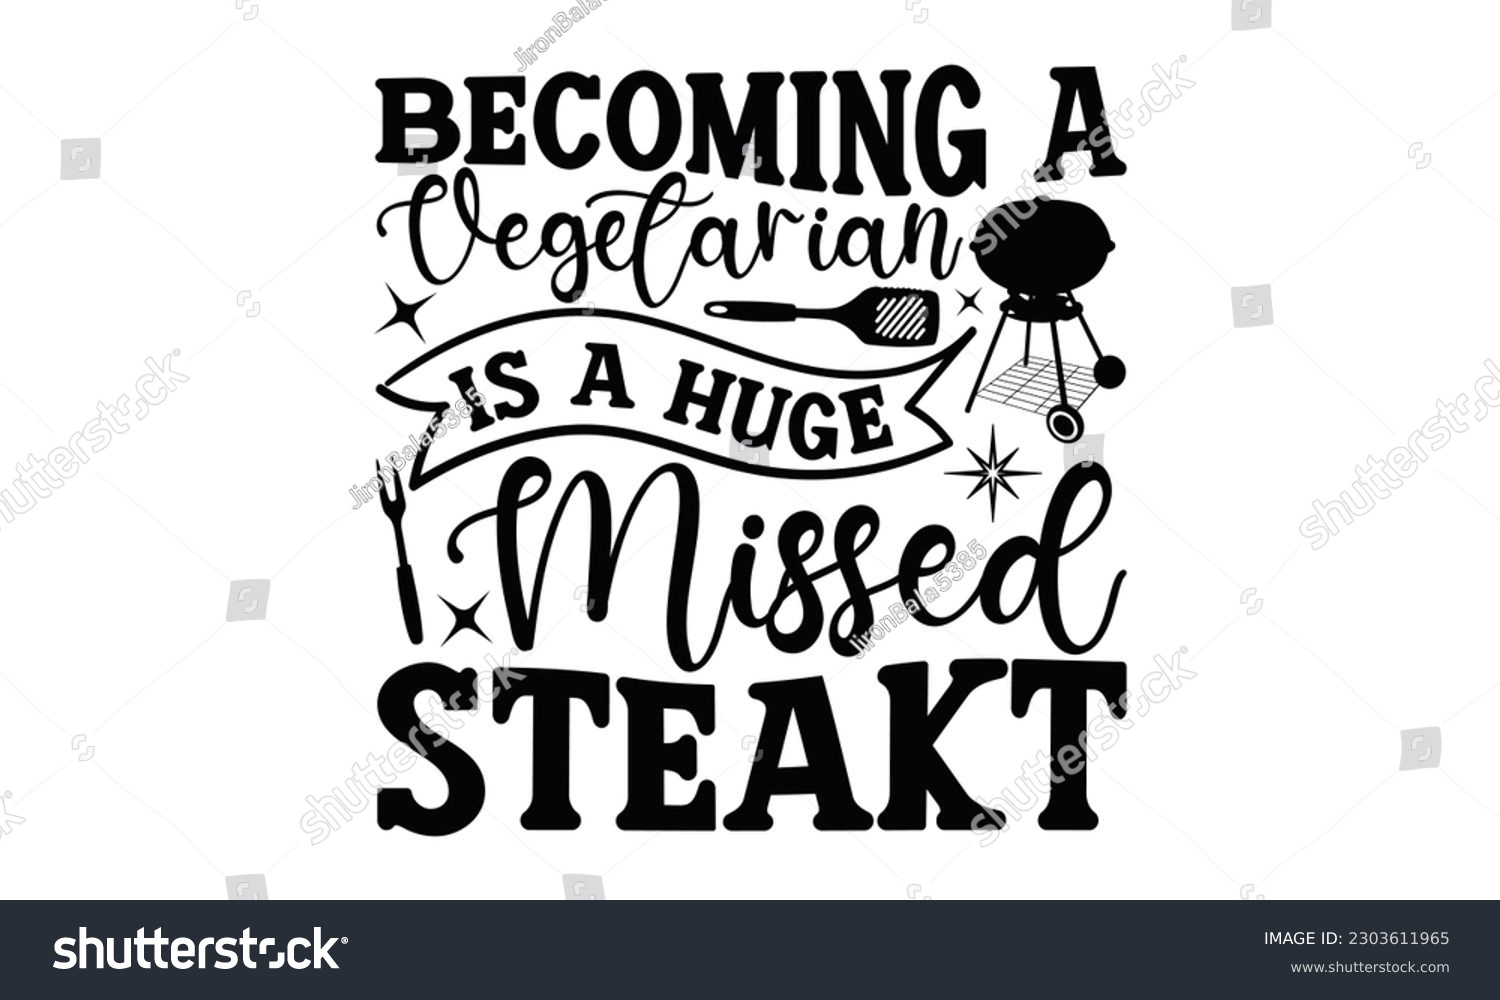 SVG of Becoming A Vegetarian Is A Huge Missed Steak - Barbecue SVG Design, Isolated on white background, Illustration for prints on t-shirts, bags, posters, cards and Mug.
 svg